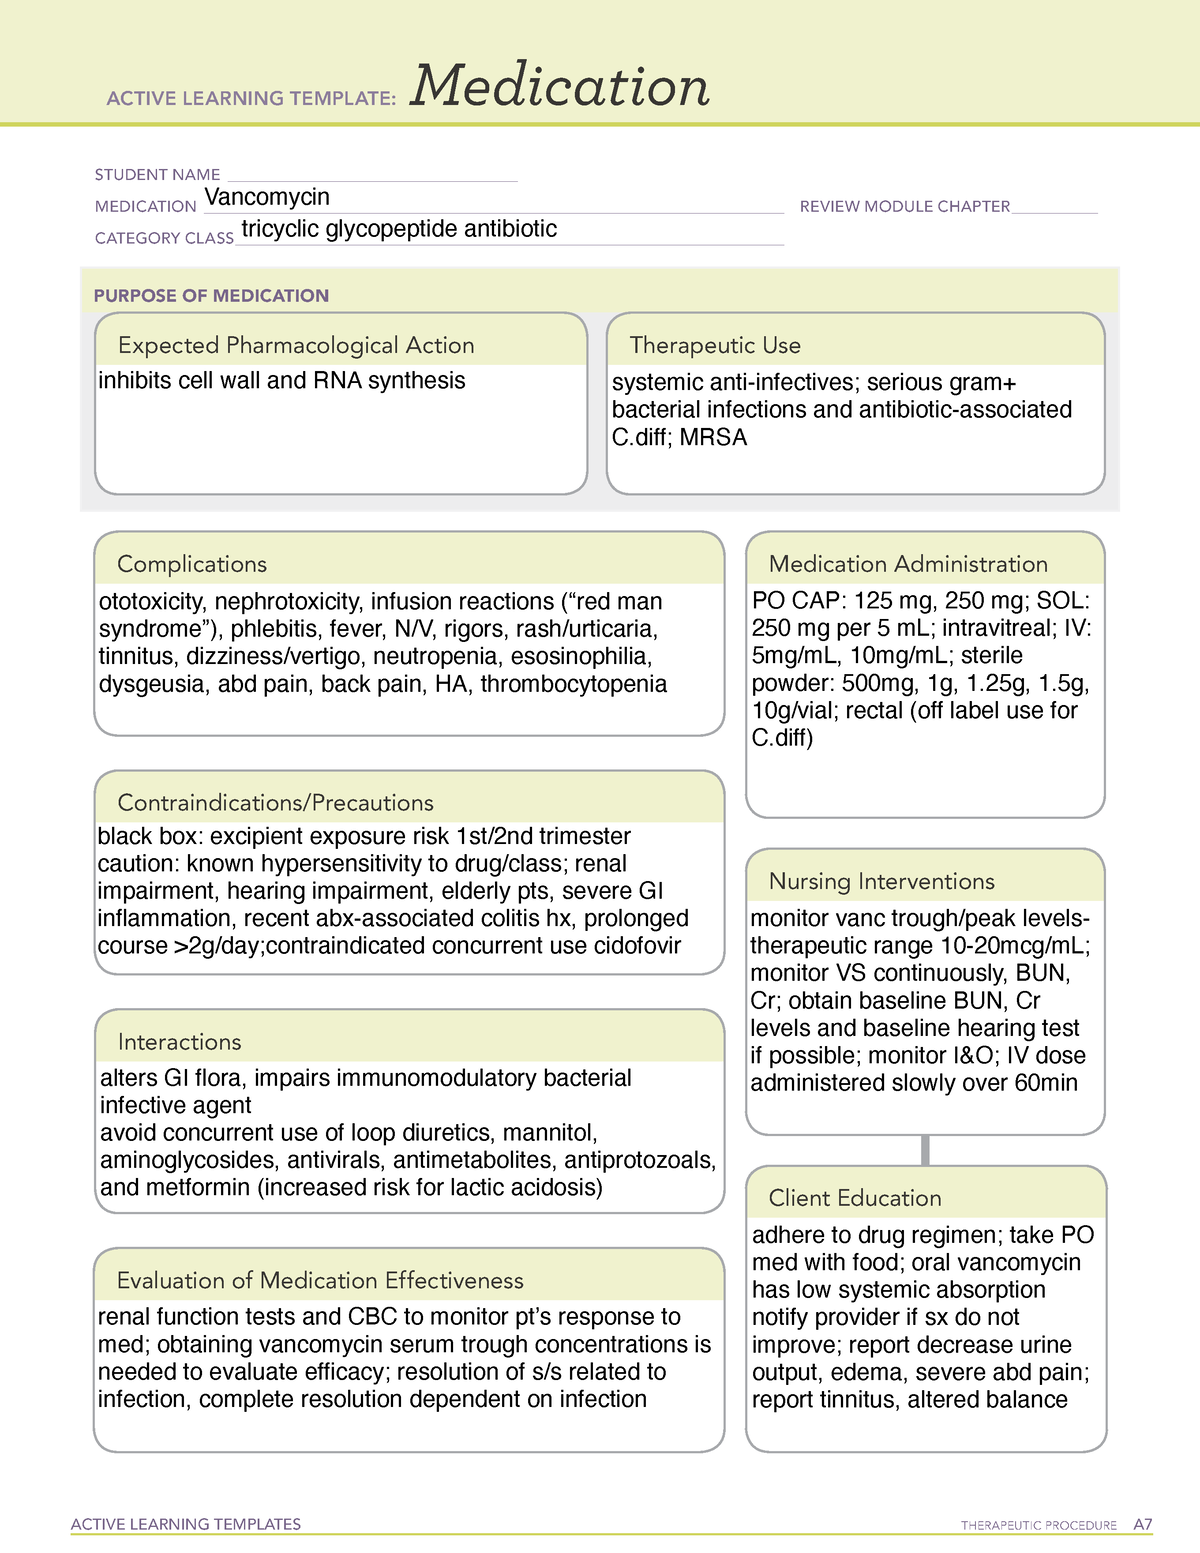 Active Learning Template Medication ACTIVE LEARNING